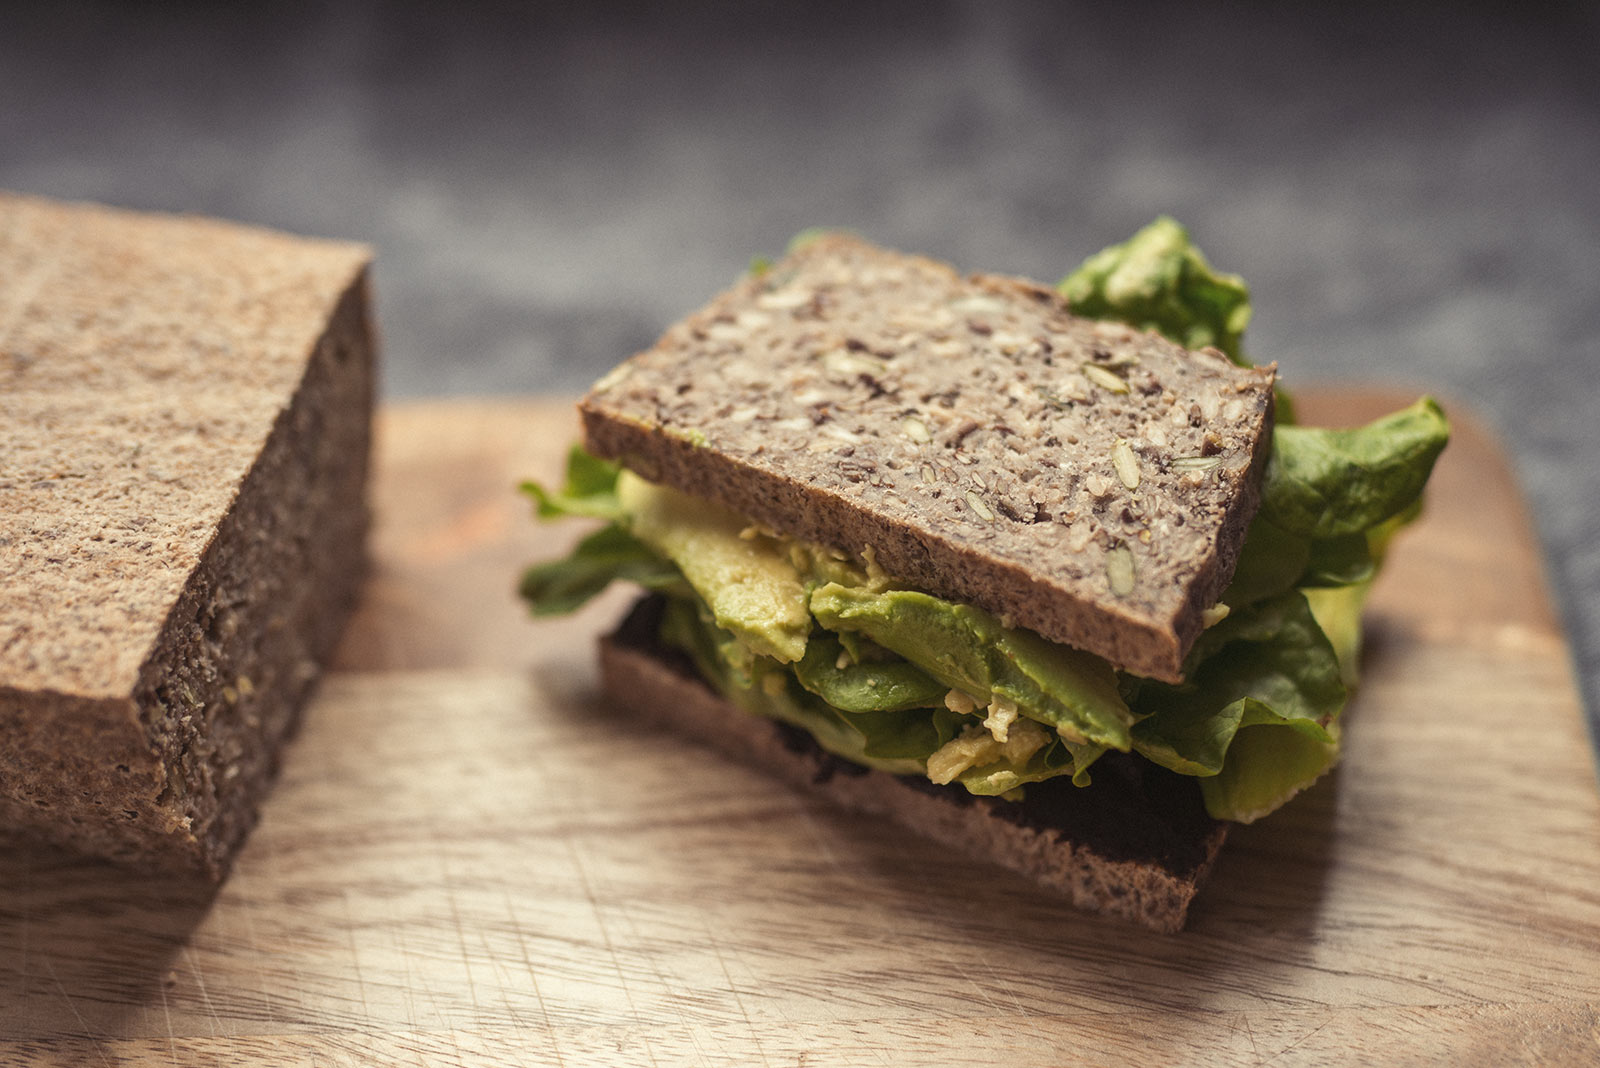 A Hatcho Miso paste avocado and lettuce sandwich on The Midnight Baker's bread